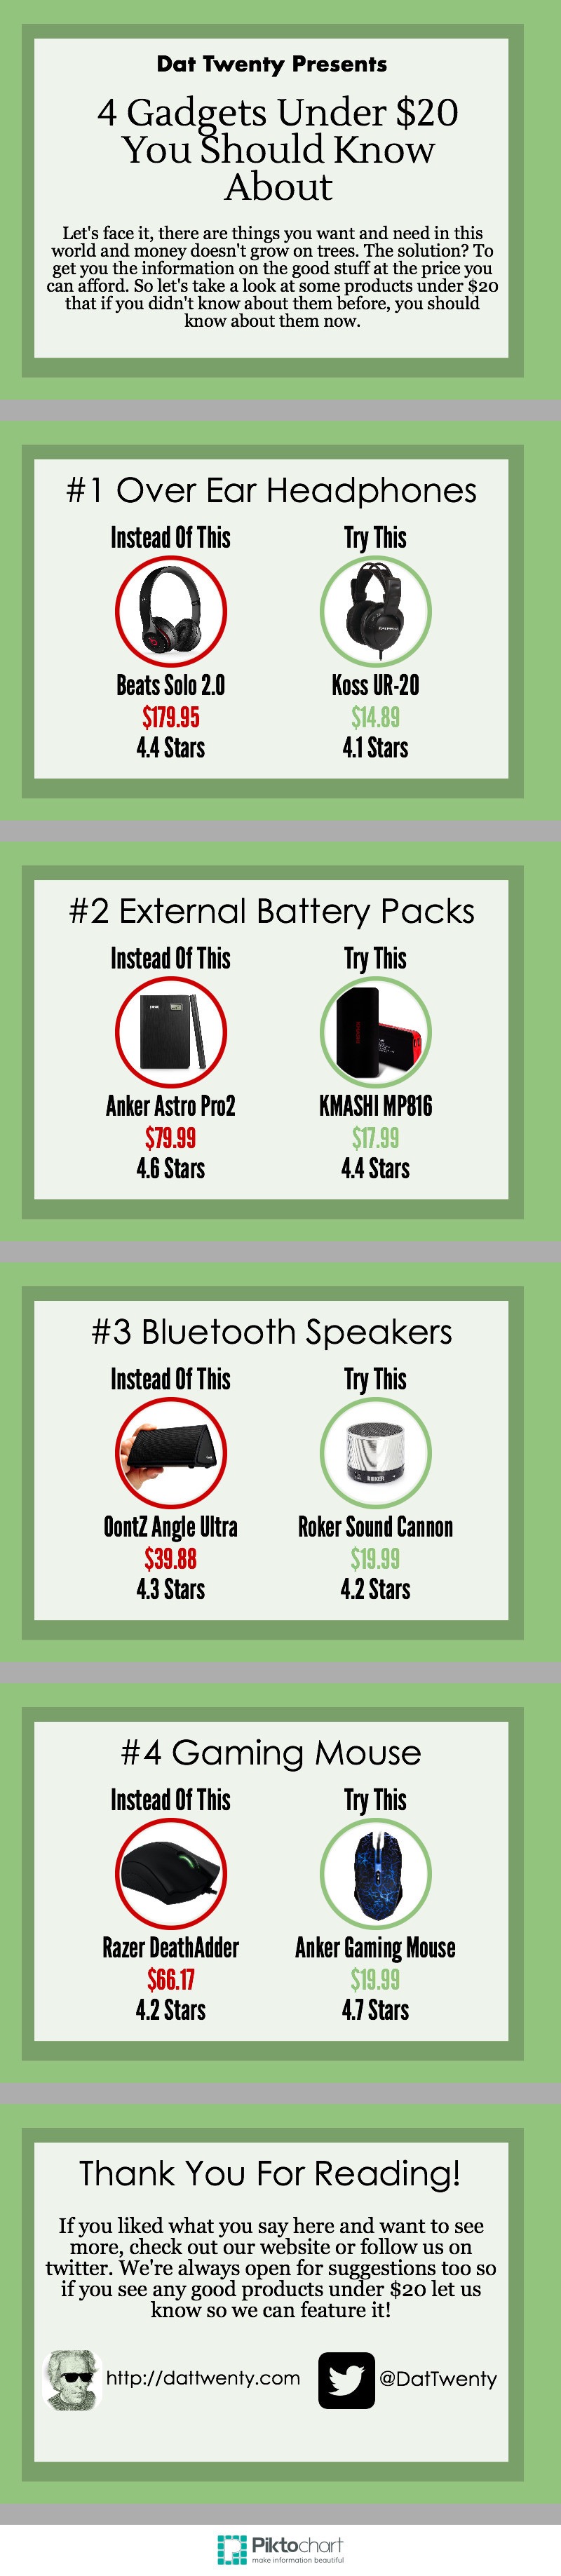 cartoon - 4 Gadgets Under $20 You Seould Know @ @ A2 Exiomai Battery Packs 43 Betooth Speakers pl Thank You For Reading